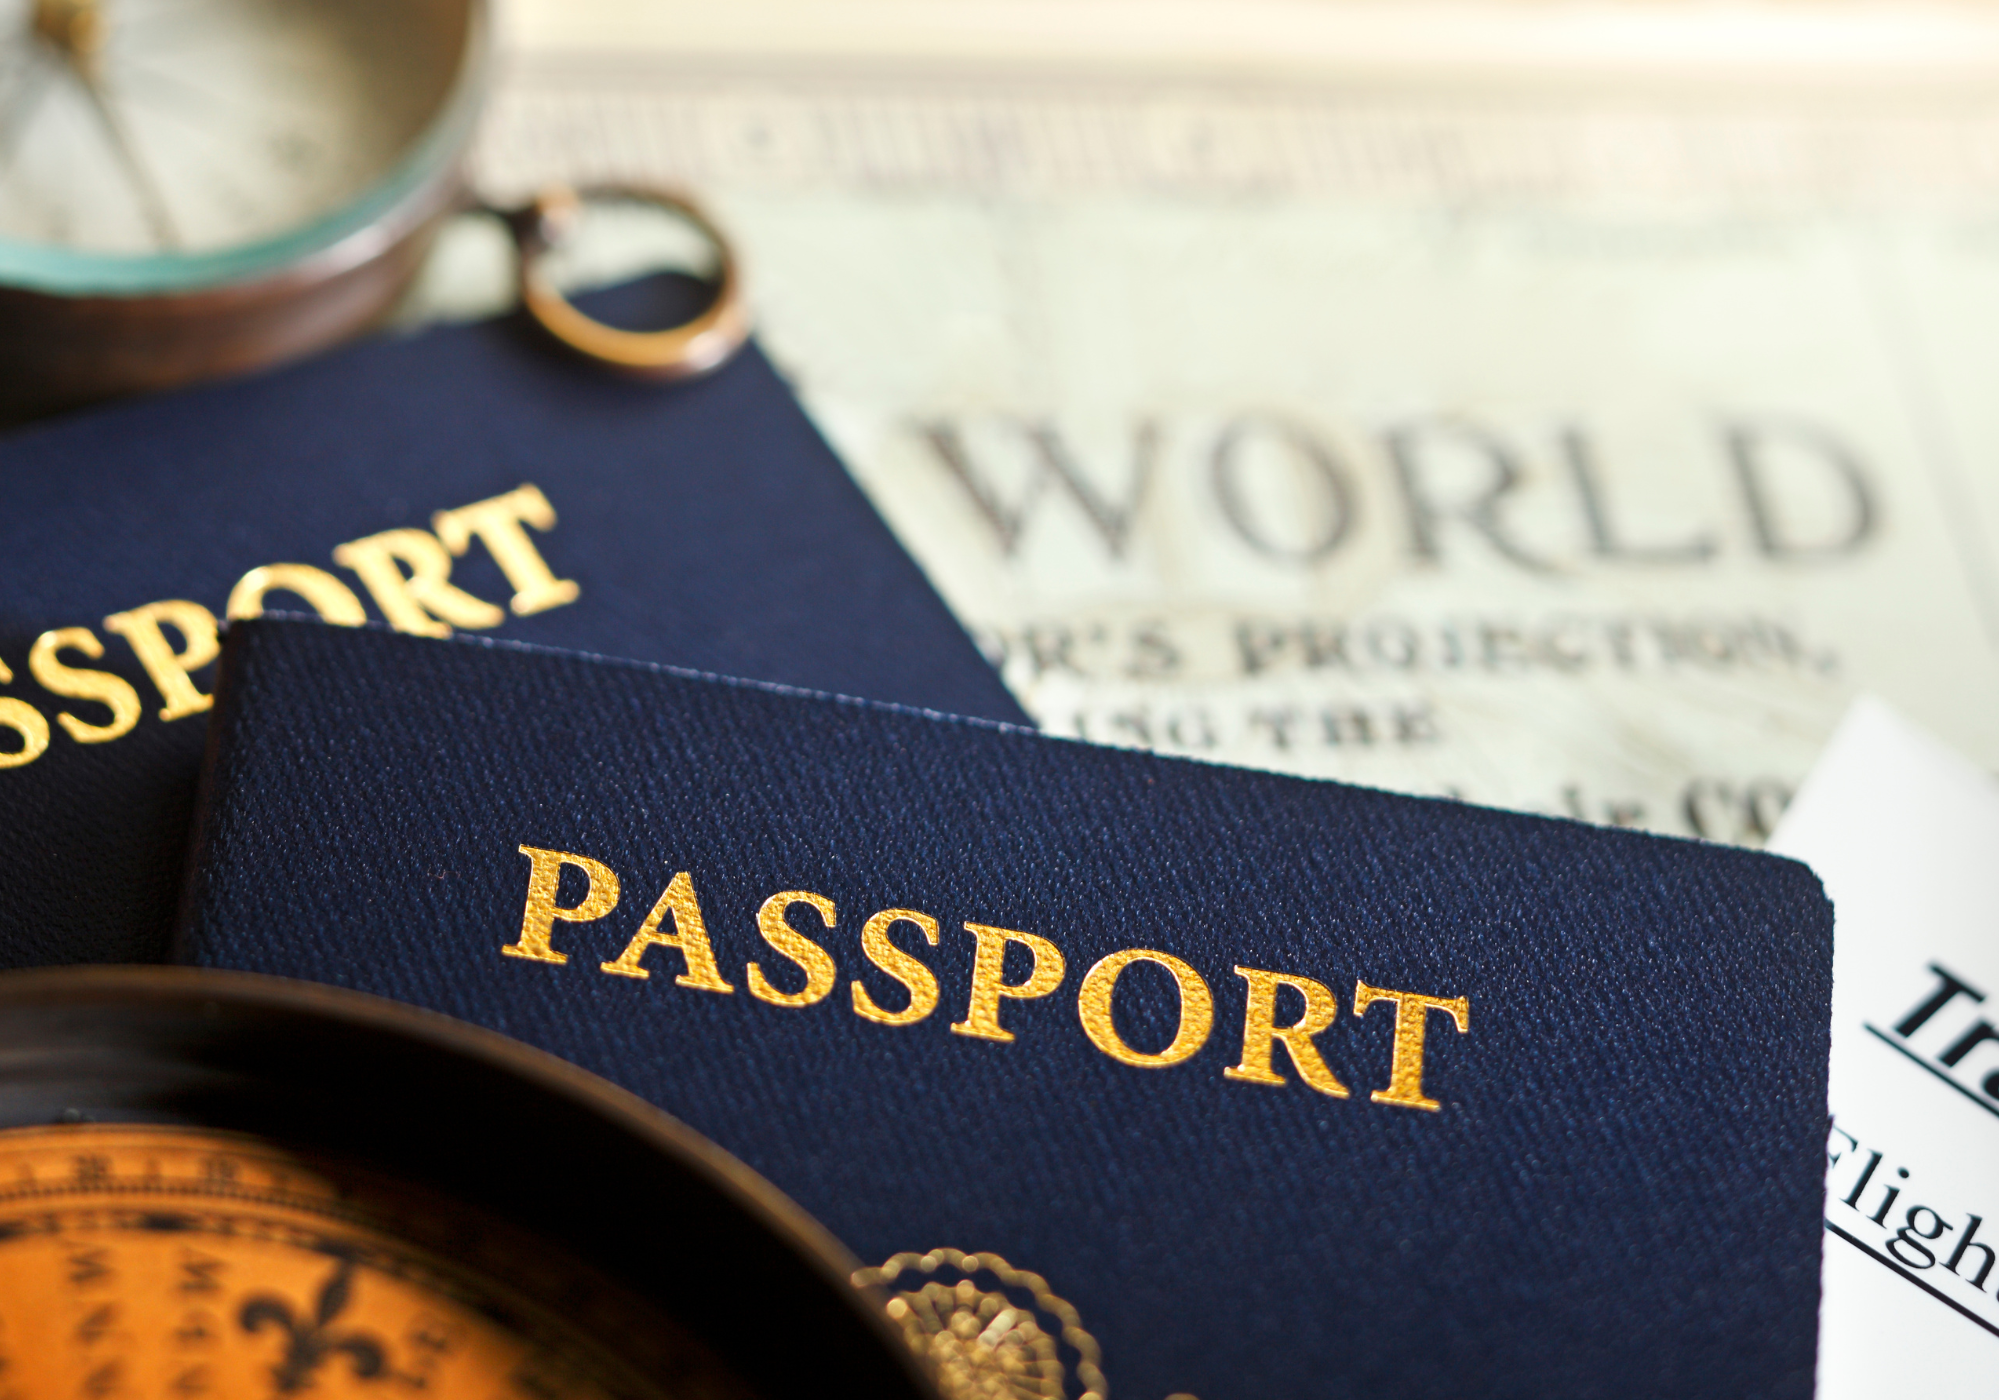 A passport on a map background